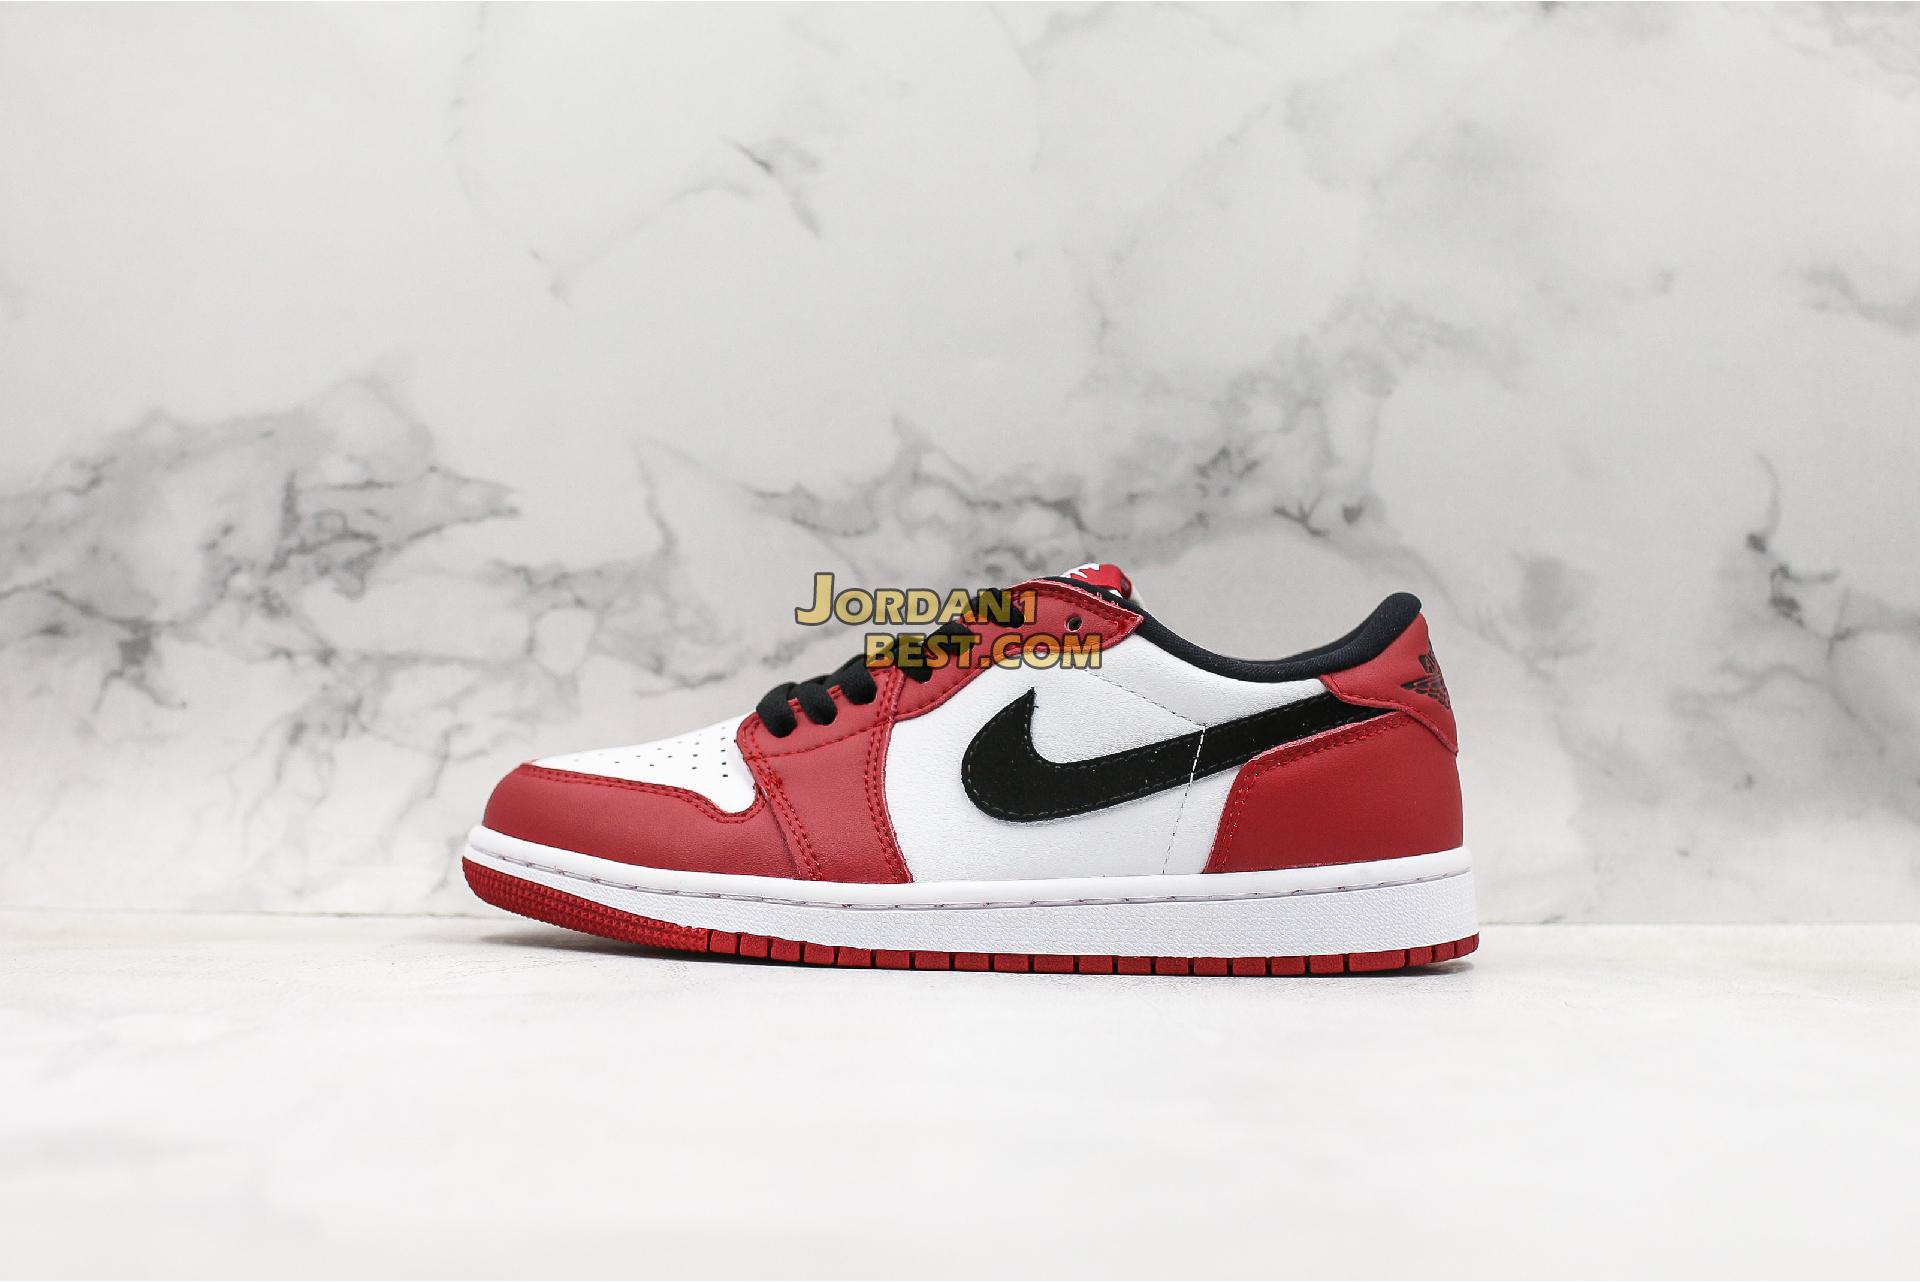 AAA Quality Air Jordan 1 Retro Low OG "Chicago" 705329-600 Mens Womens varsity red/black-white Shoes replicas On Wholesale Sale Online